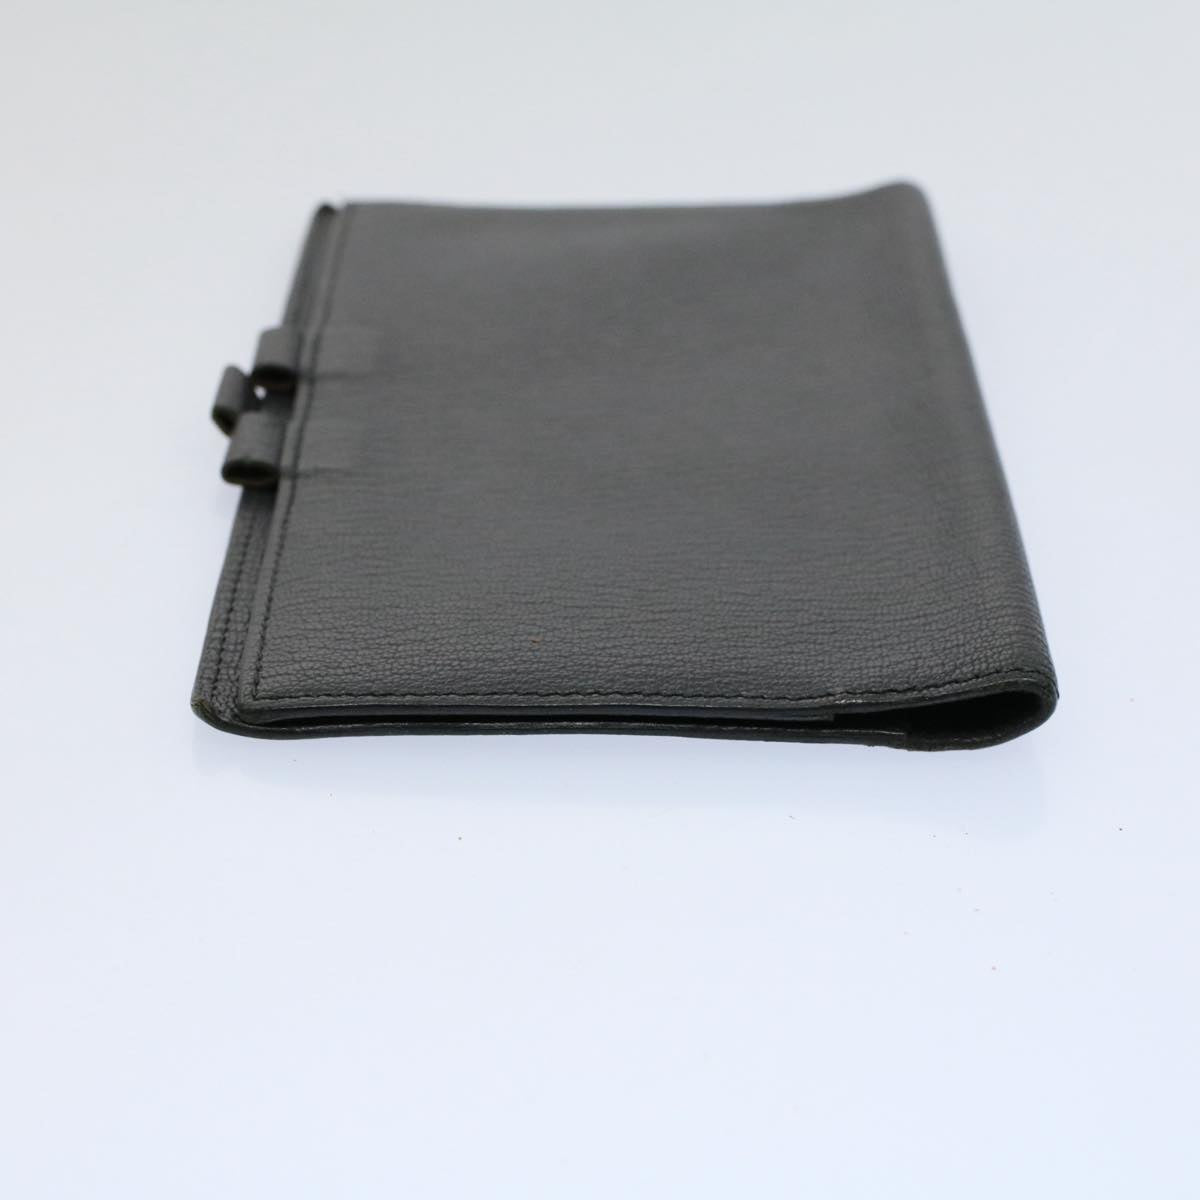 HERMES Agenda Day Planner Cover Leather Gray Auth bs9468